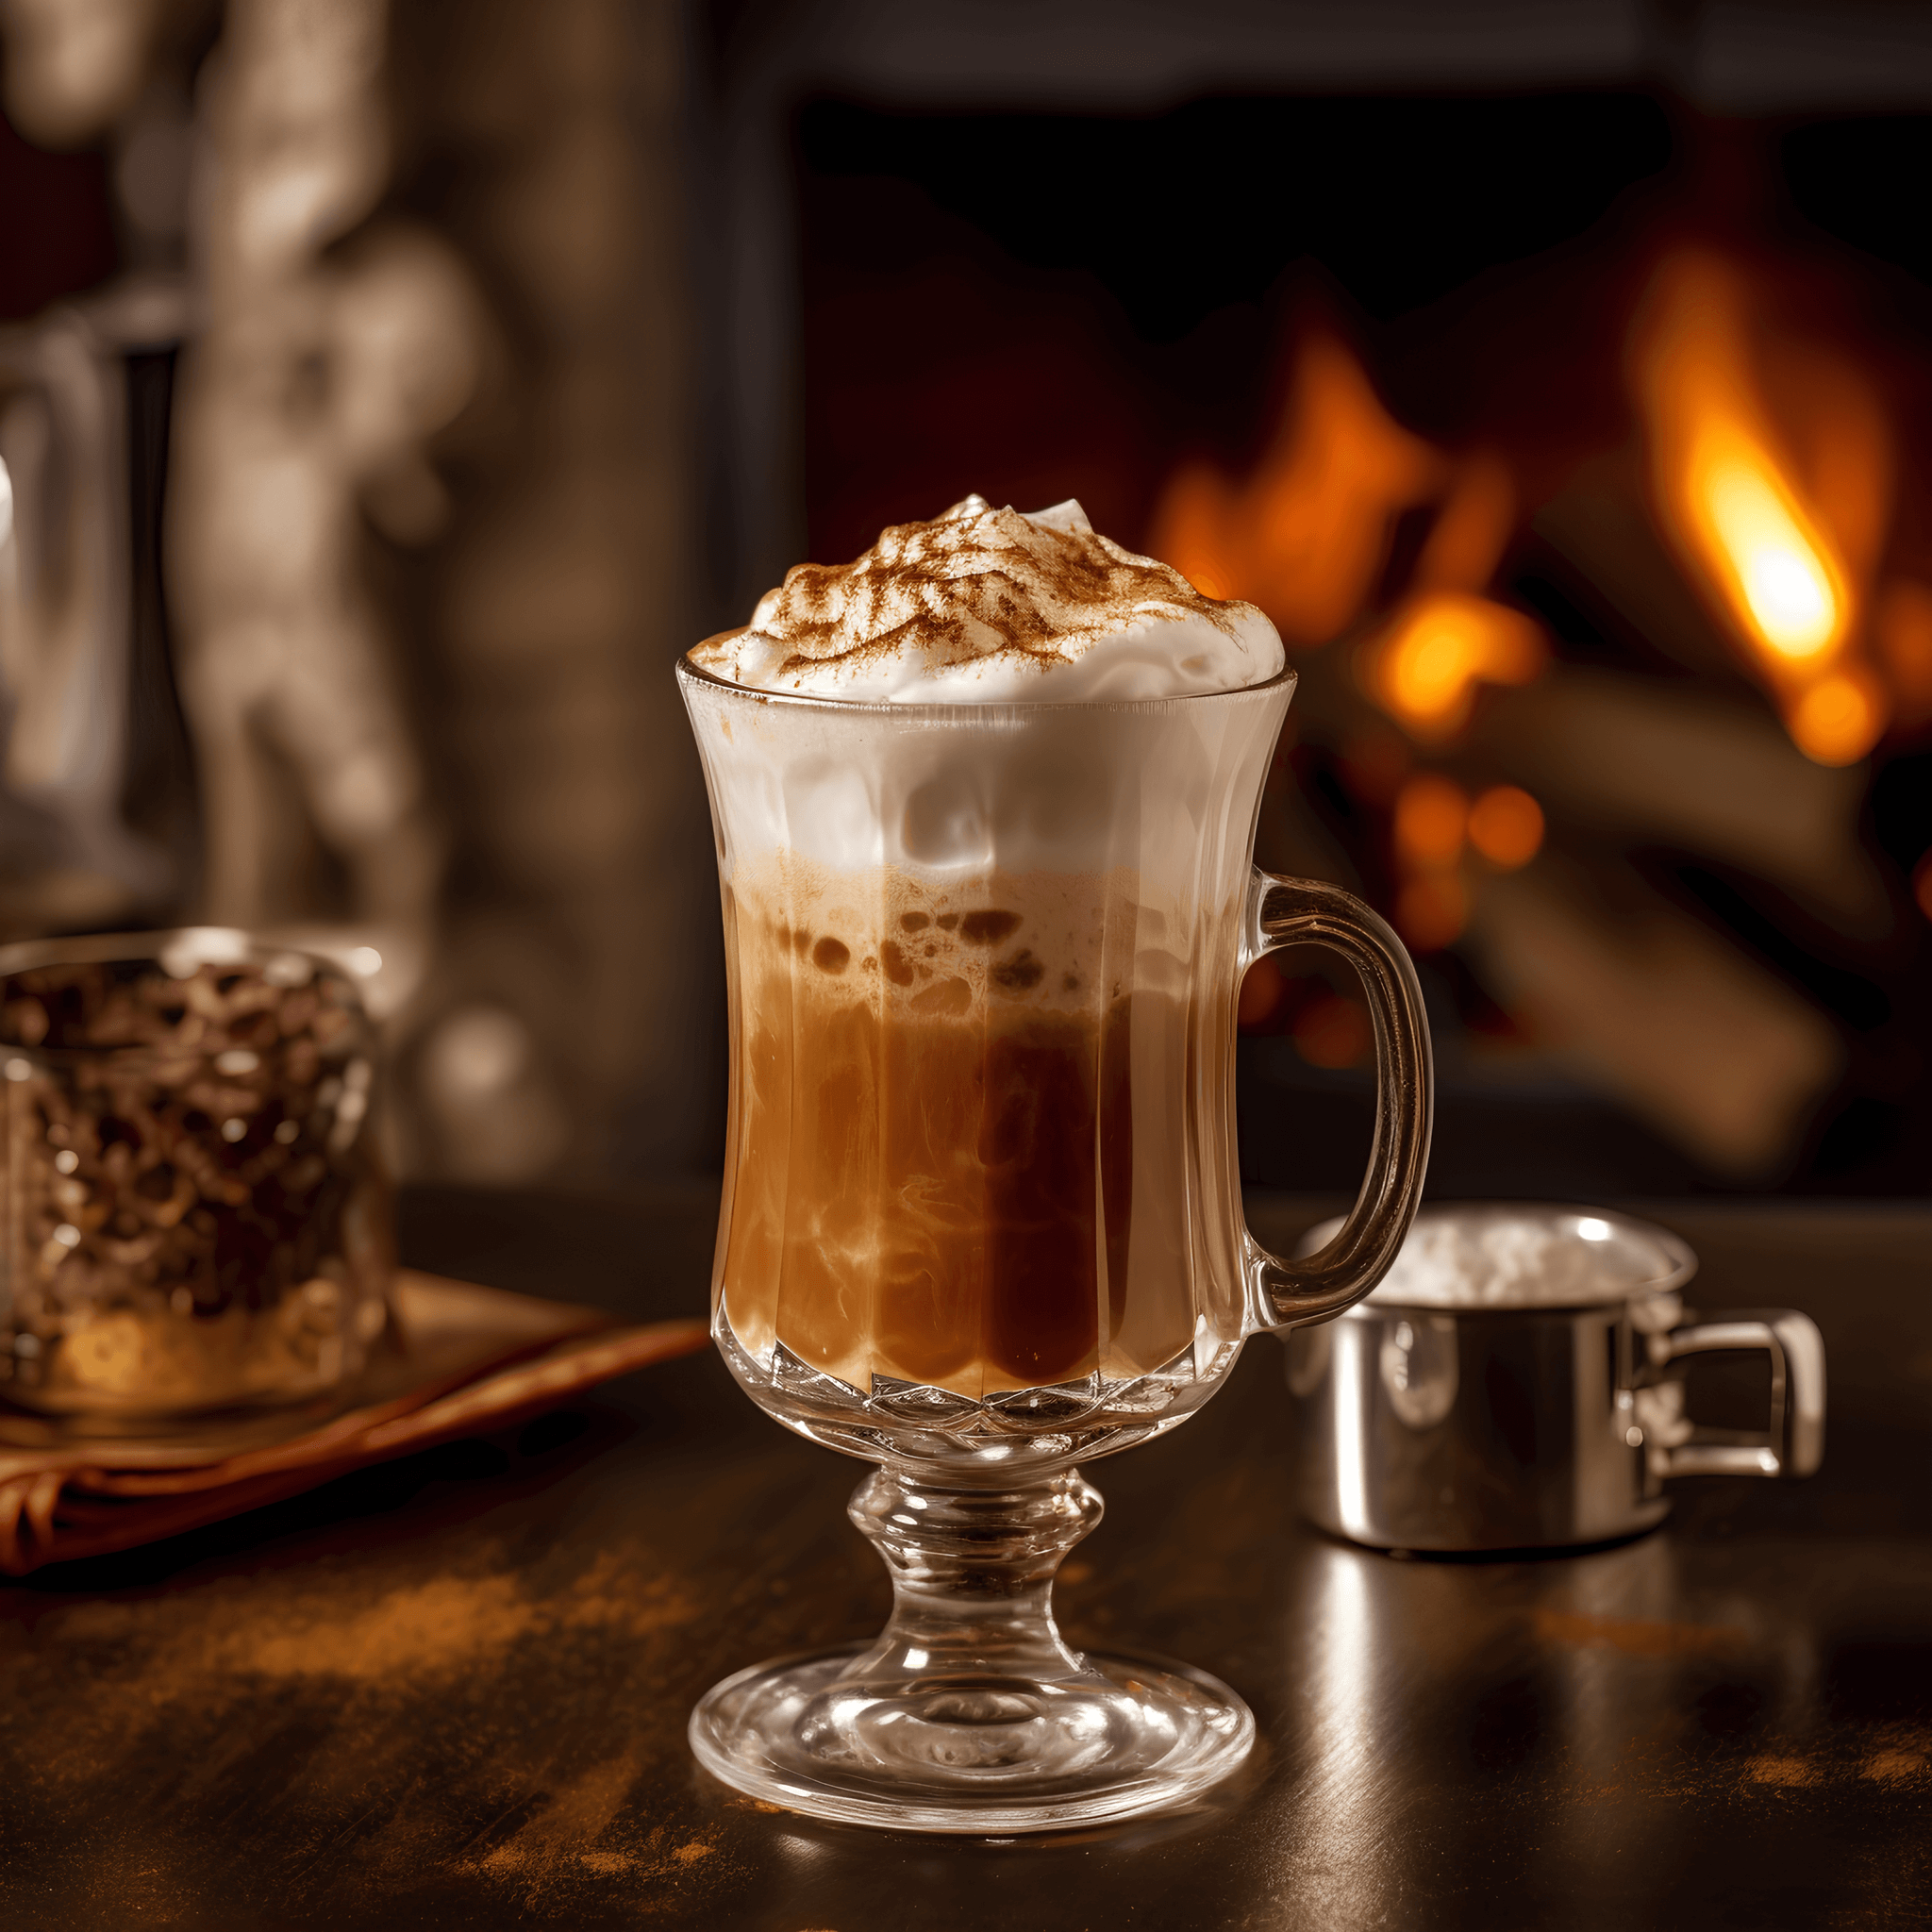 Irish Coffee Cocktail Recipe - Irish Coffee is a warm, rich, and creamy cocktail with a perfect balance of bitter coffee, sweet sugar, and smooth Irish whiskey. The whipped cream adds a luxurious, velvety texture.